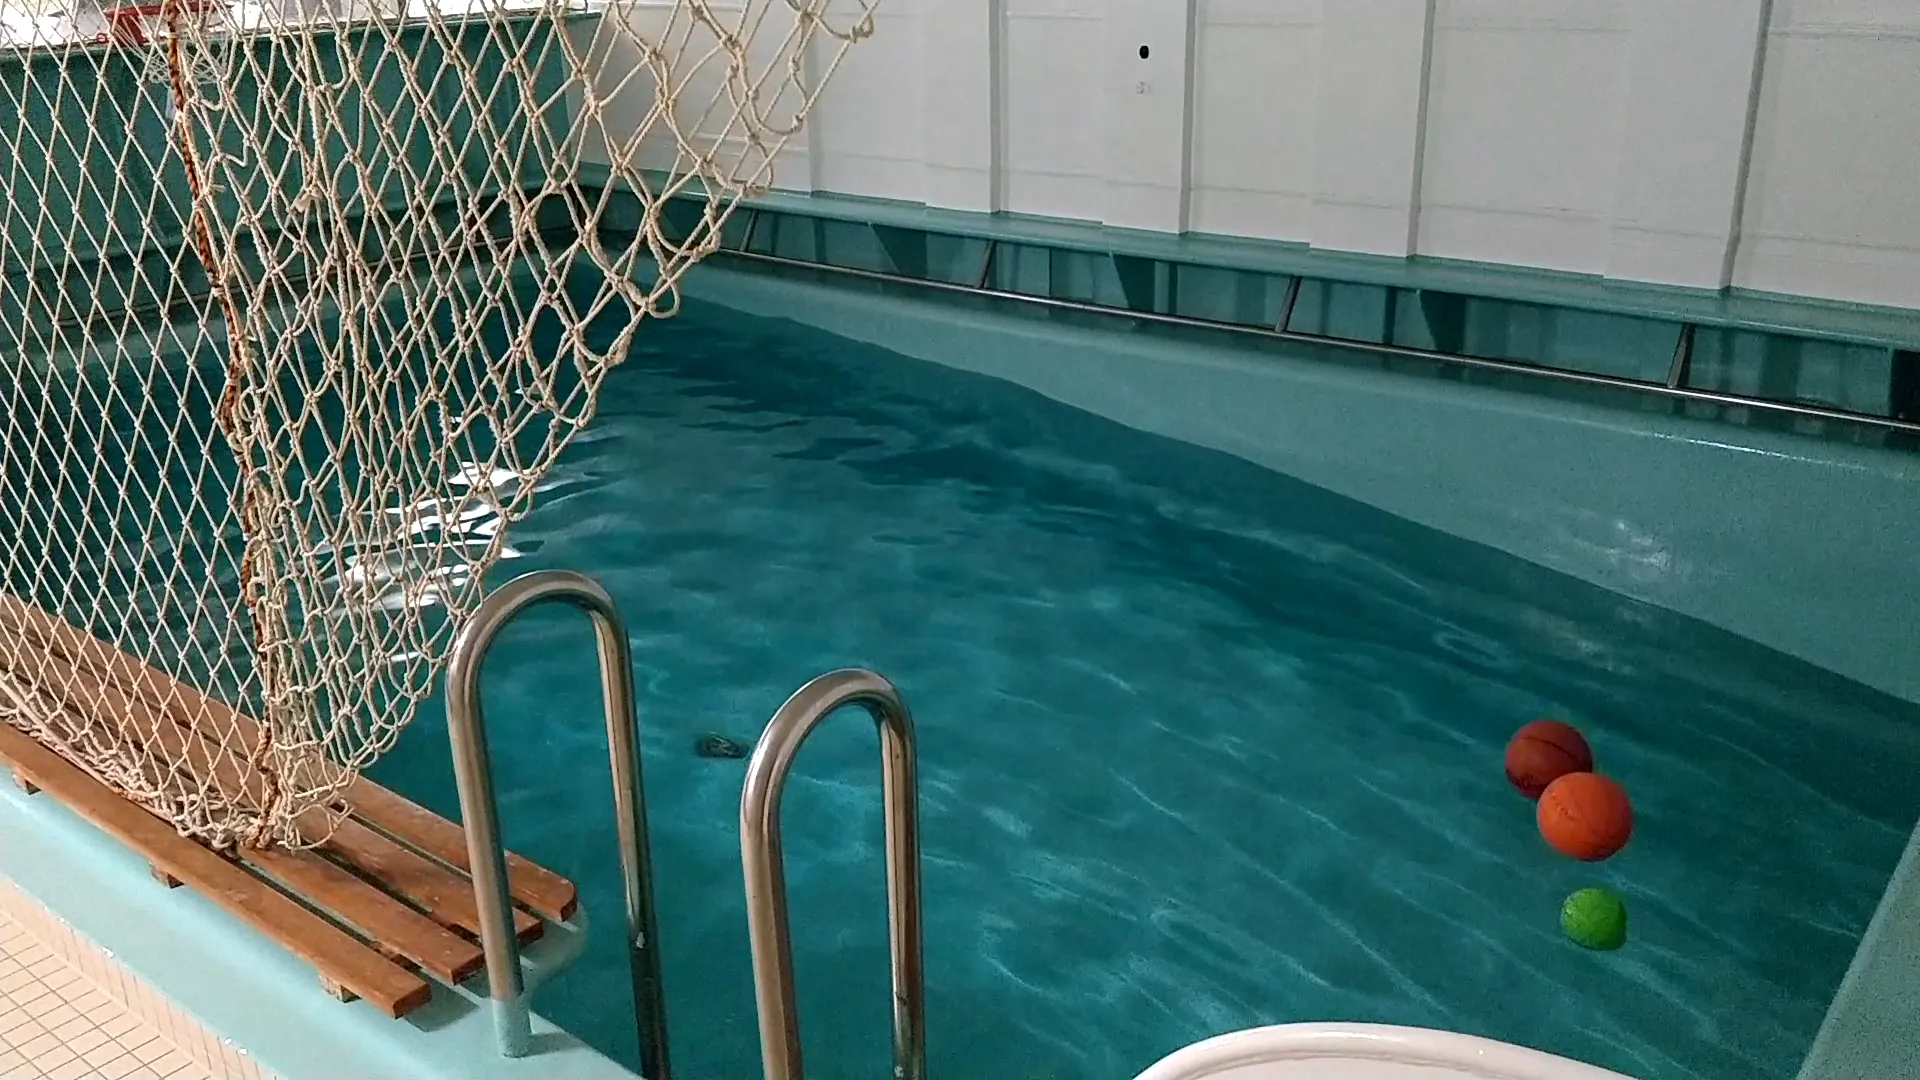 A light blue swimming pool with a basketball floating on the surface of the water, which is at a surprising angle.